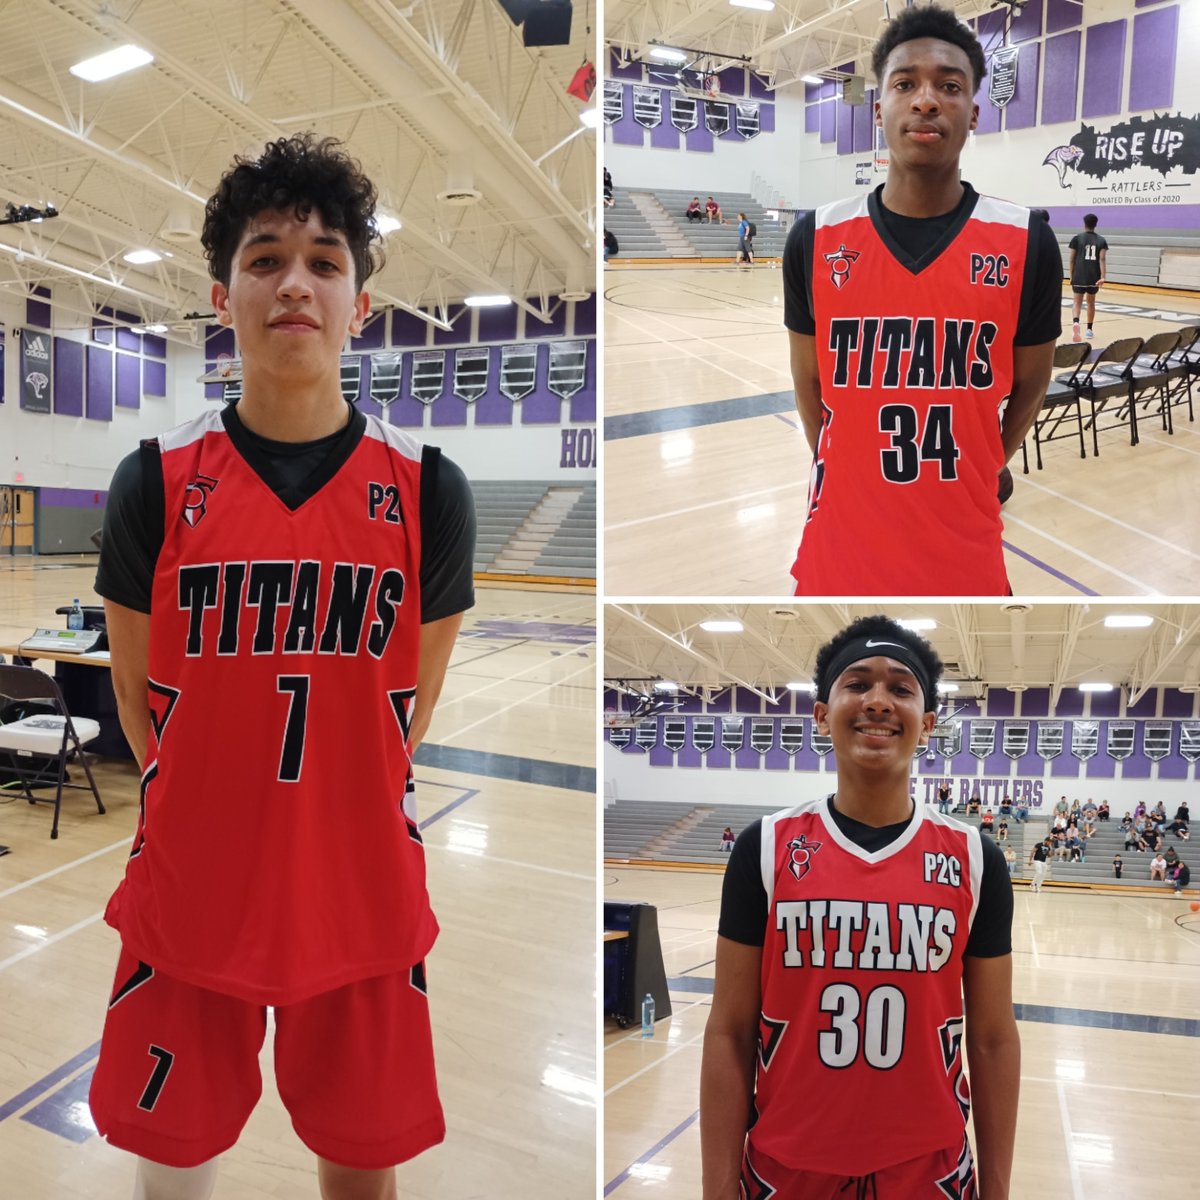 El Paso Titans (TX) has some players available (#7) Diego Carrera 6'6, (34) Jamal Williams 6'3:& (30) Jashaun Kinnard 6'2 all three unsigned seniors played well at the 15th Annual Easter Classic 🏀 in Phoenix. College coaches tap in on these dudes they can play.& need a look